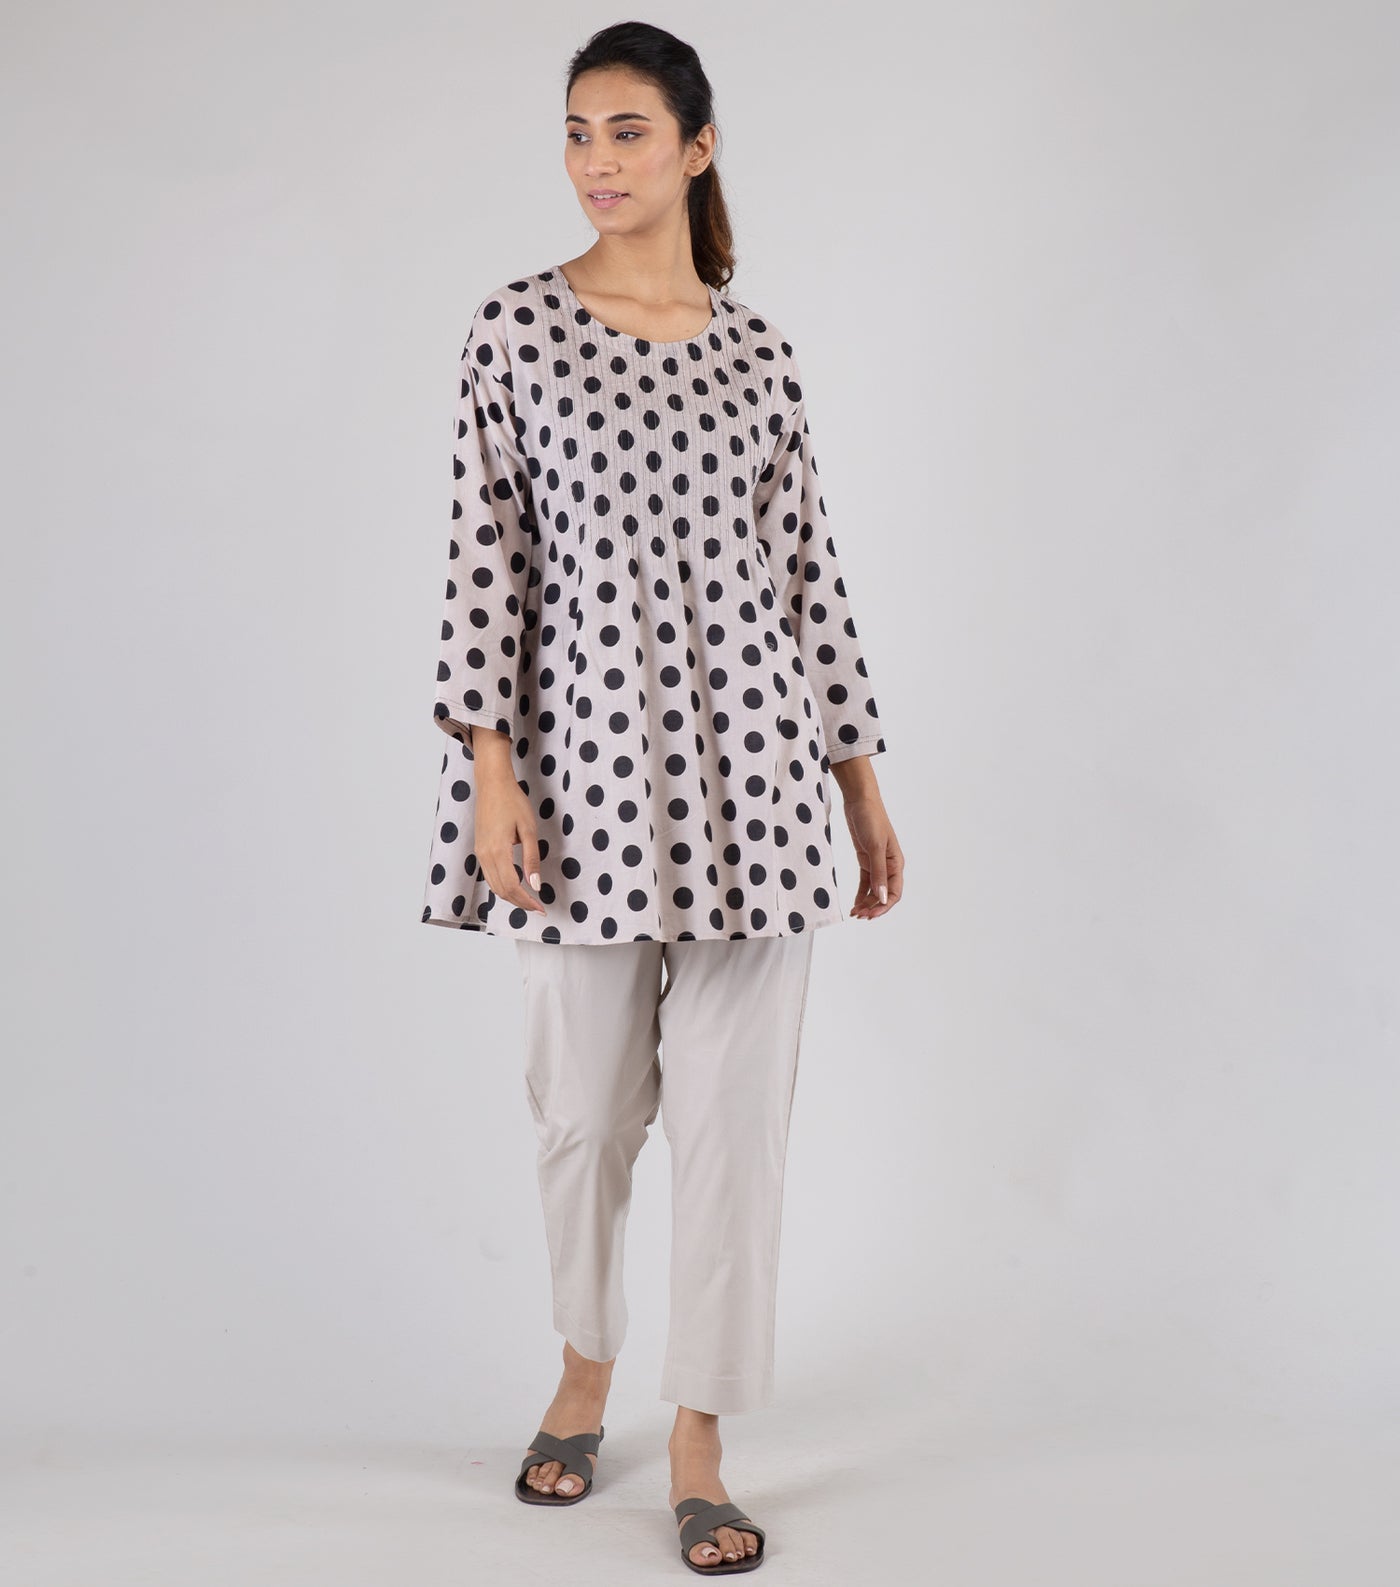 Ivory Cotton Printed Top